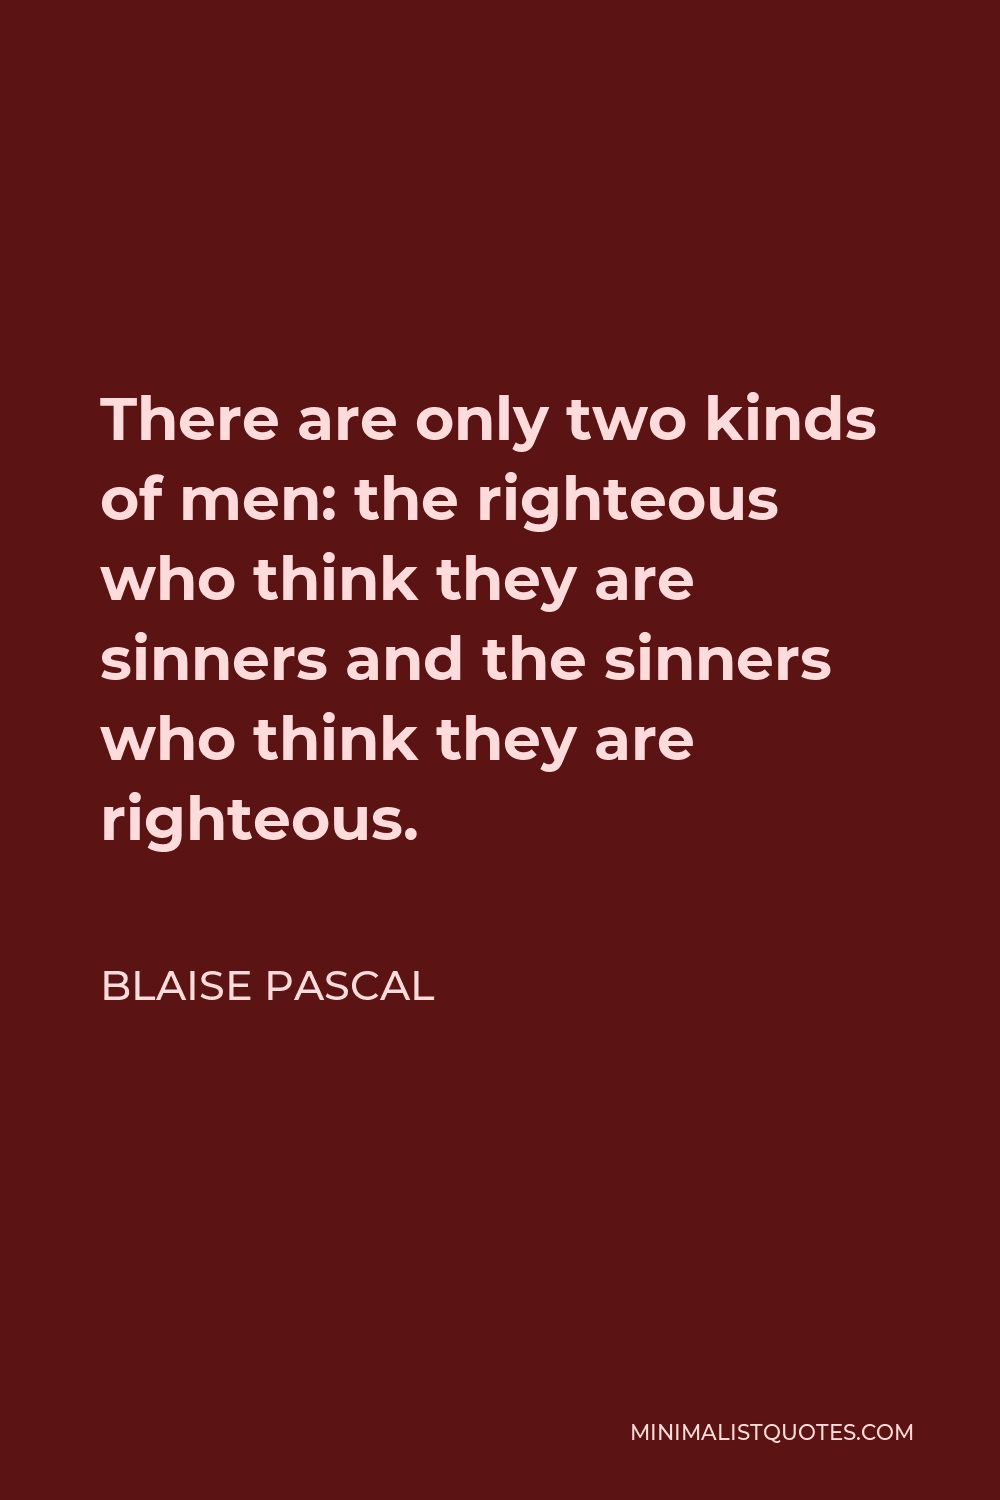 Blaise Pascal Quote - There are only two kinds of men: the righteous who think they are sinners and the sinners who think they are righteous.